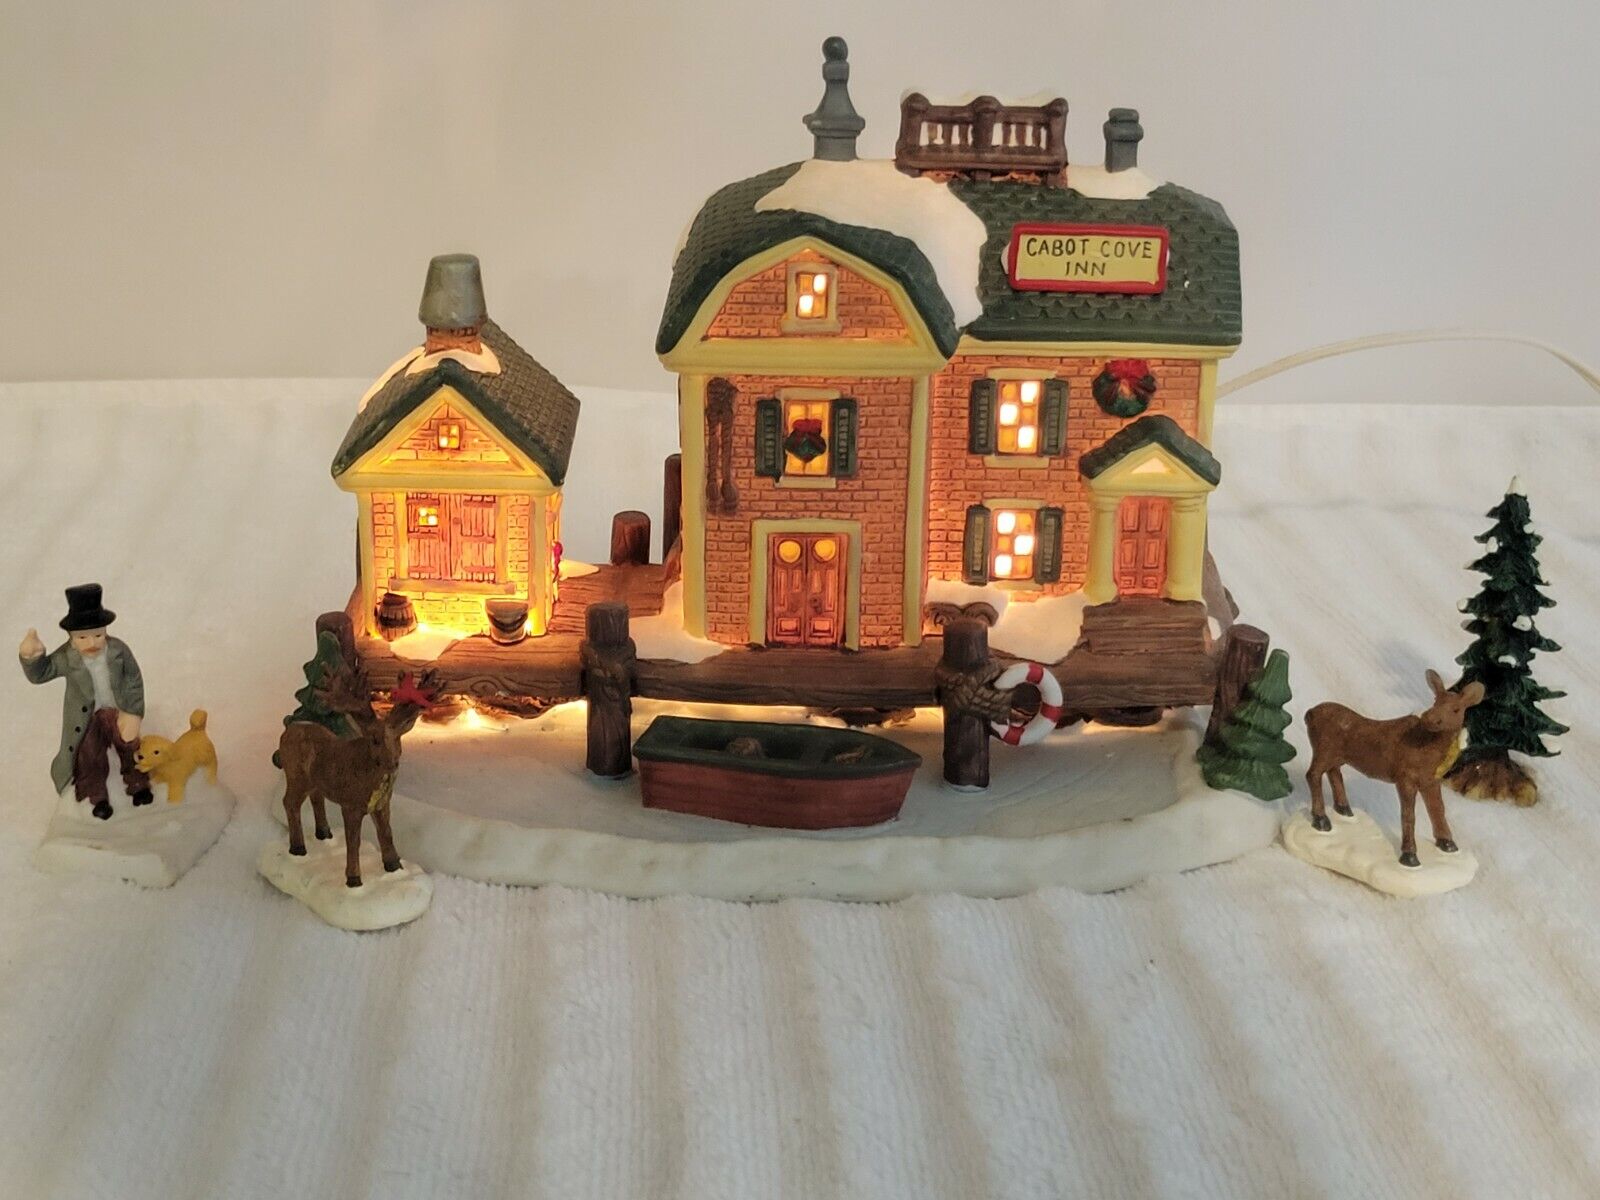 Vintage Victorian Village Collectible 1999 Edition Christmas Cabot Cove Inn